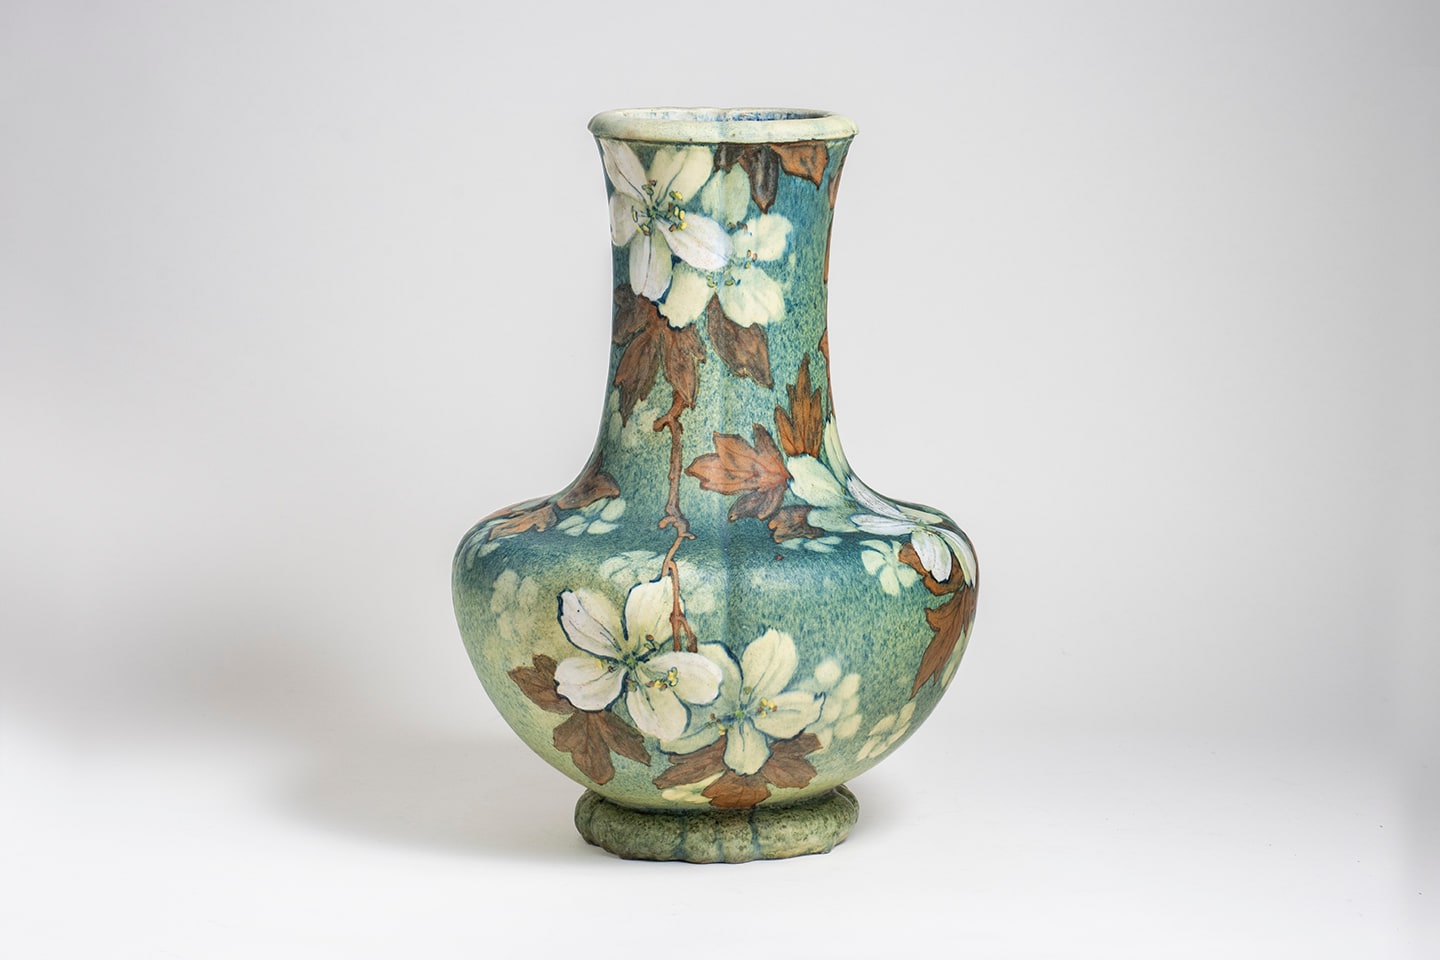 a monumental glazed stoneware vase of baluster form with foot, the body in a matte speckled blue-green glaze with overall motif of white hawthorn blossoms and green-brown leaves